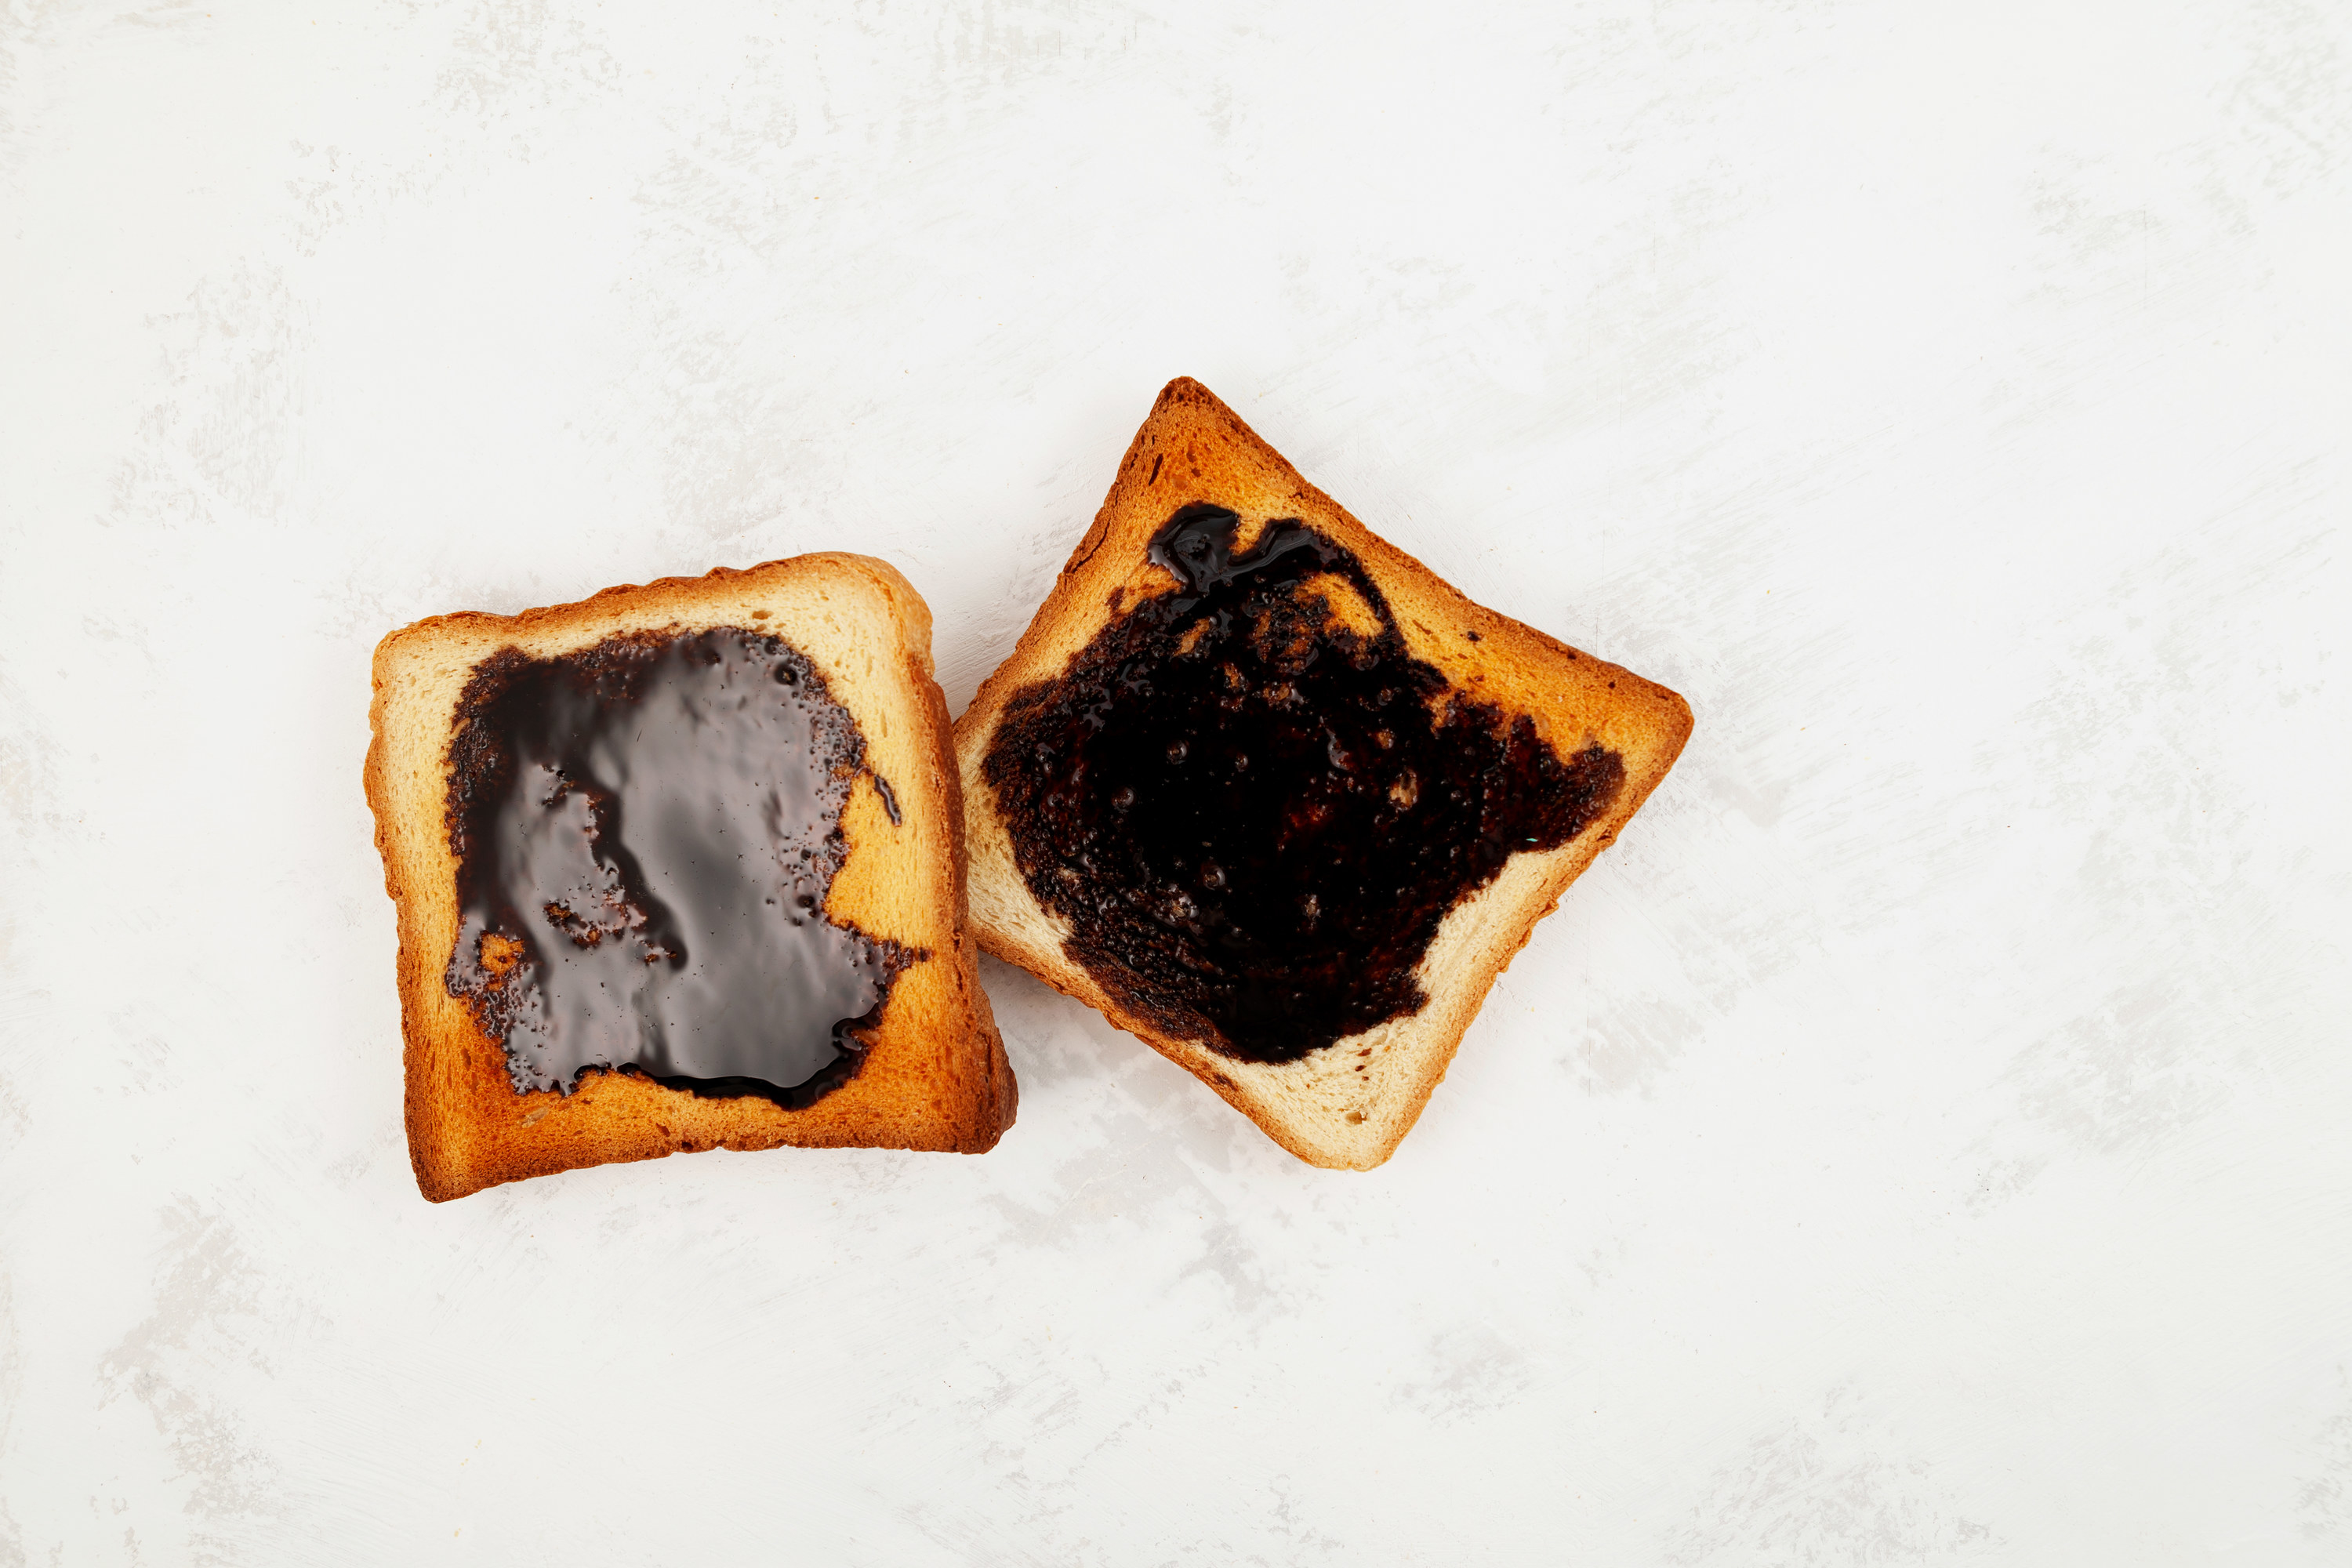 Two Roasted Aussie savoury toasts with vegemite spread